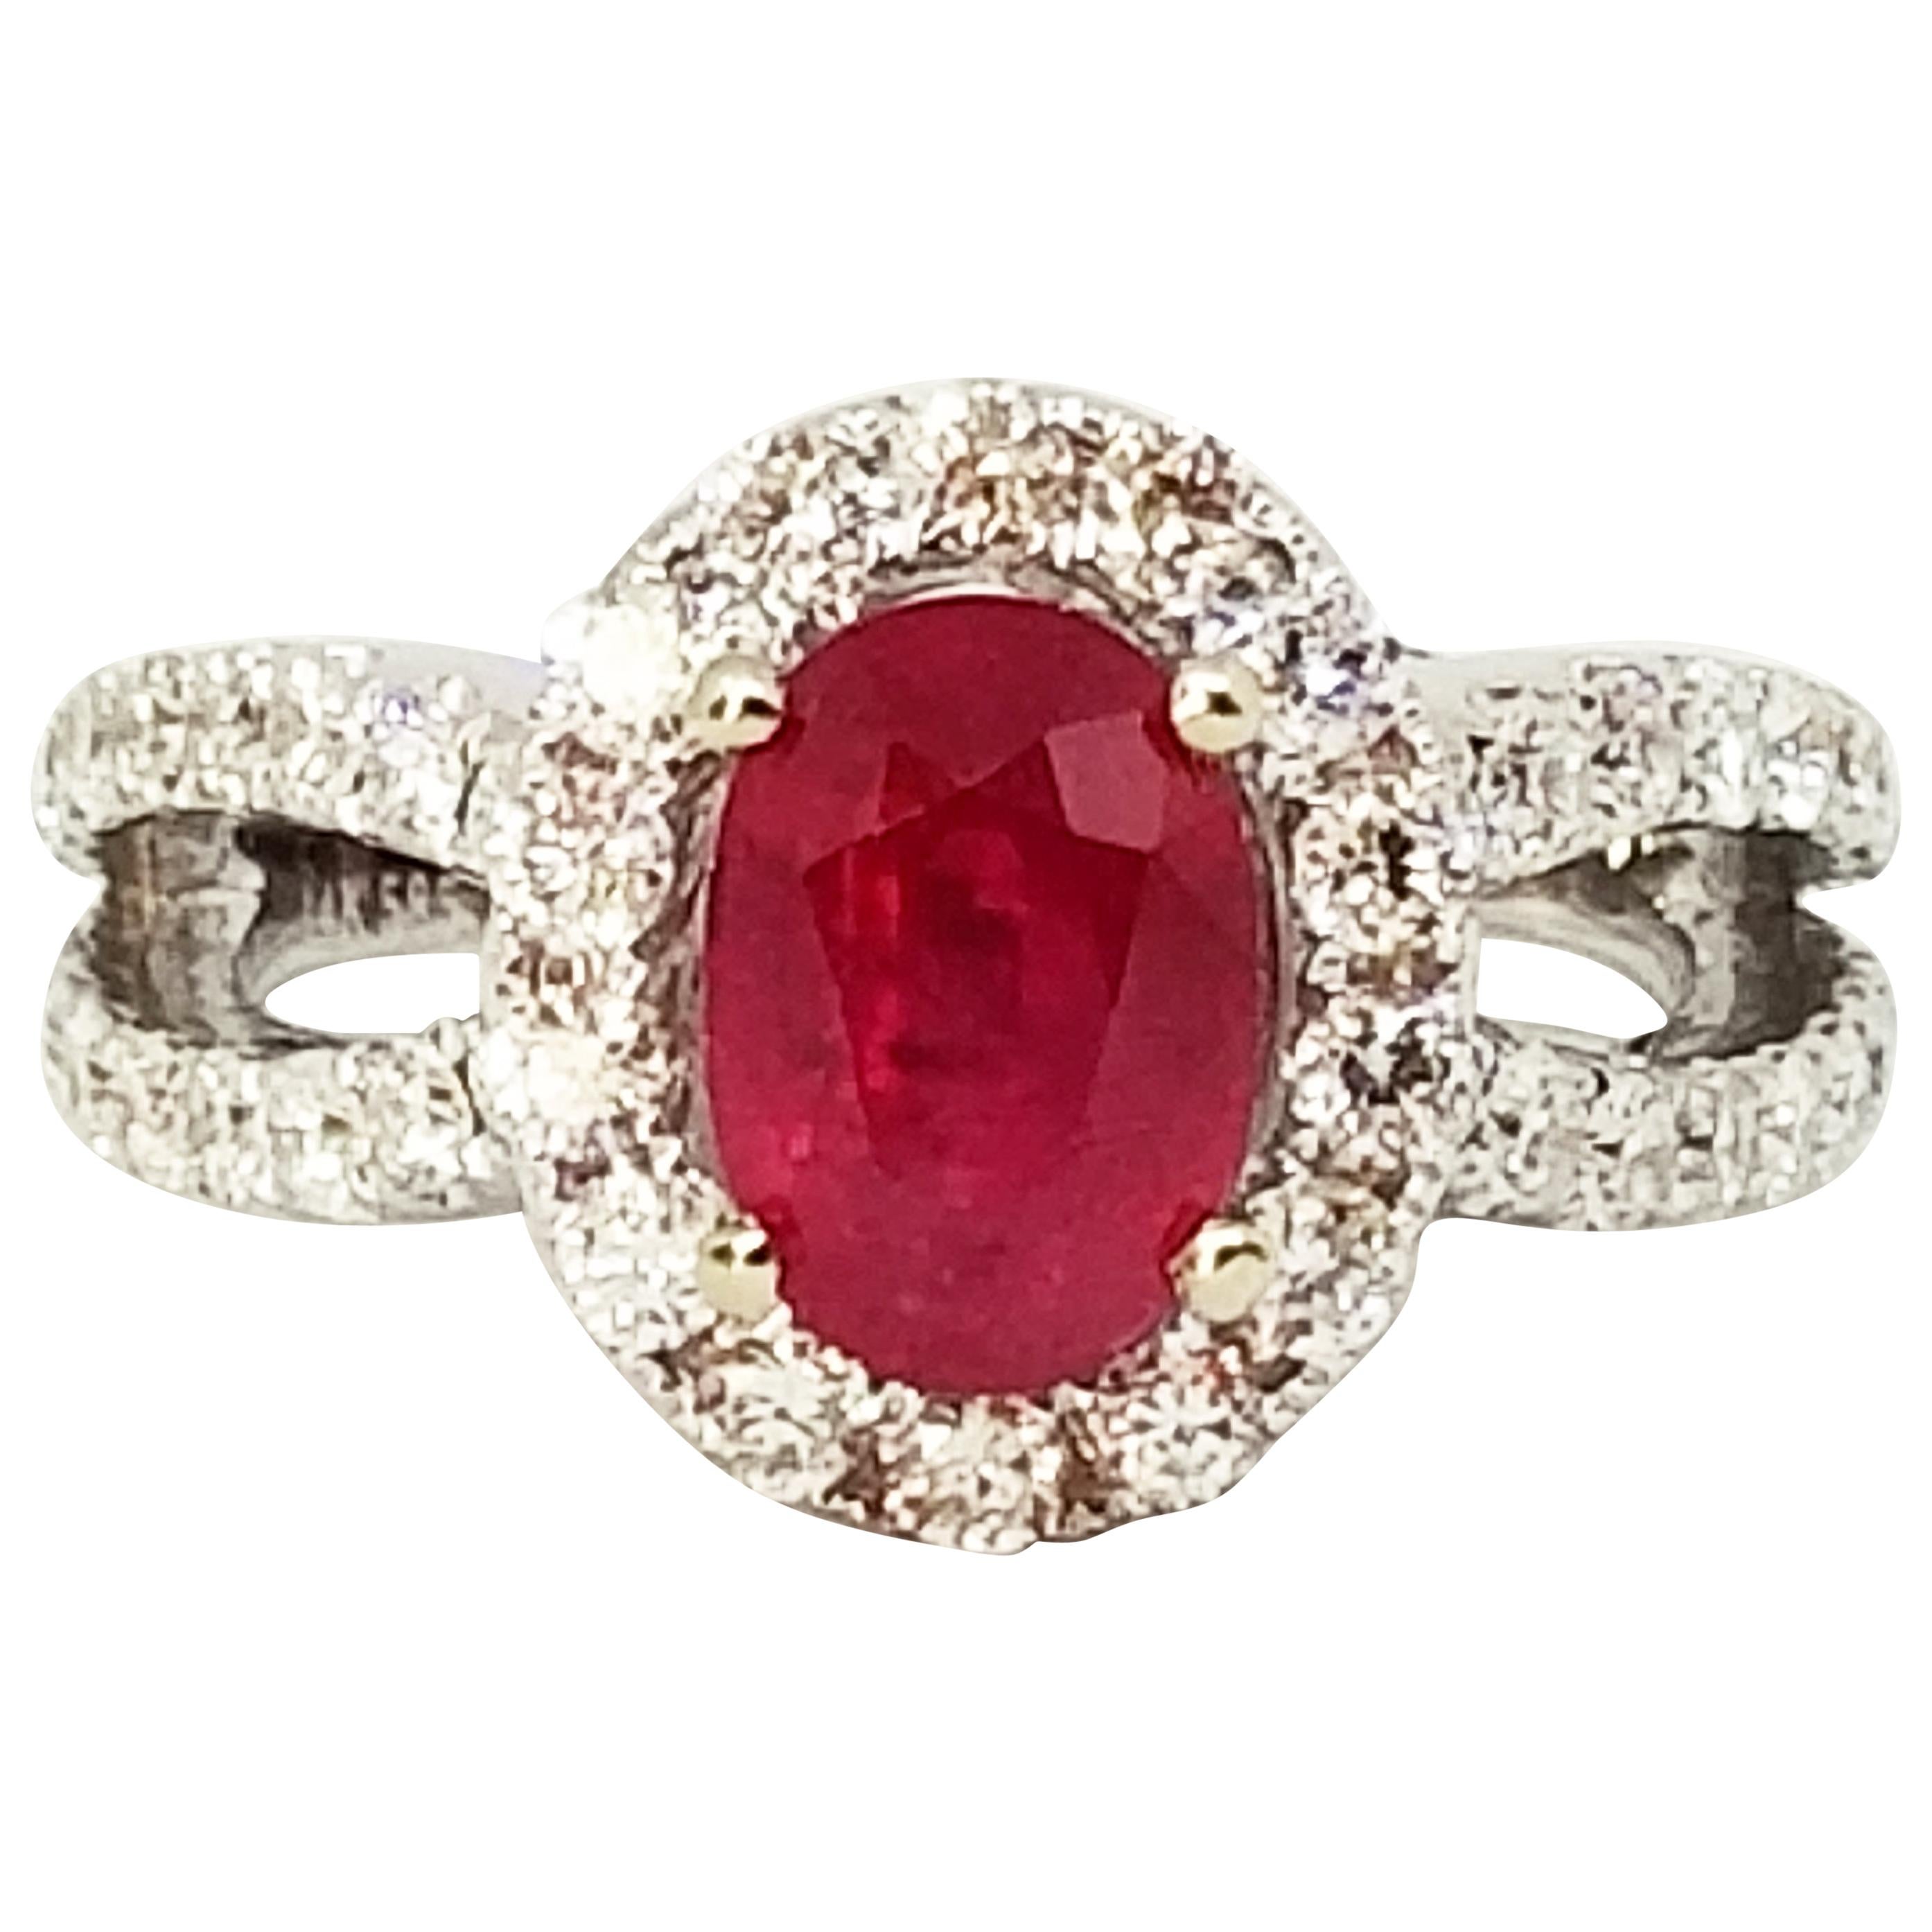 2.38 Carat Oval Ruby 1.81 Carat Diamond Halo Ring Woven Shoulders White Gold